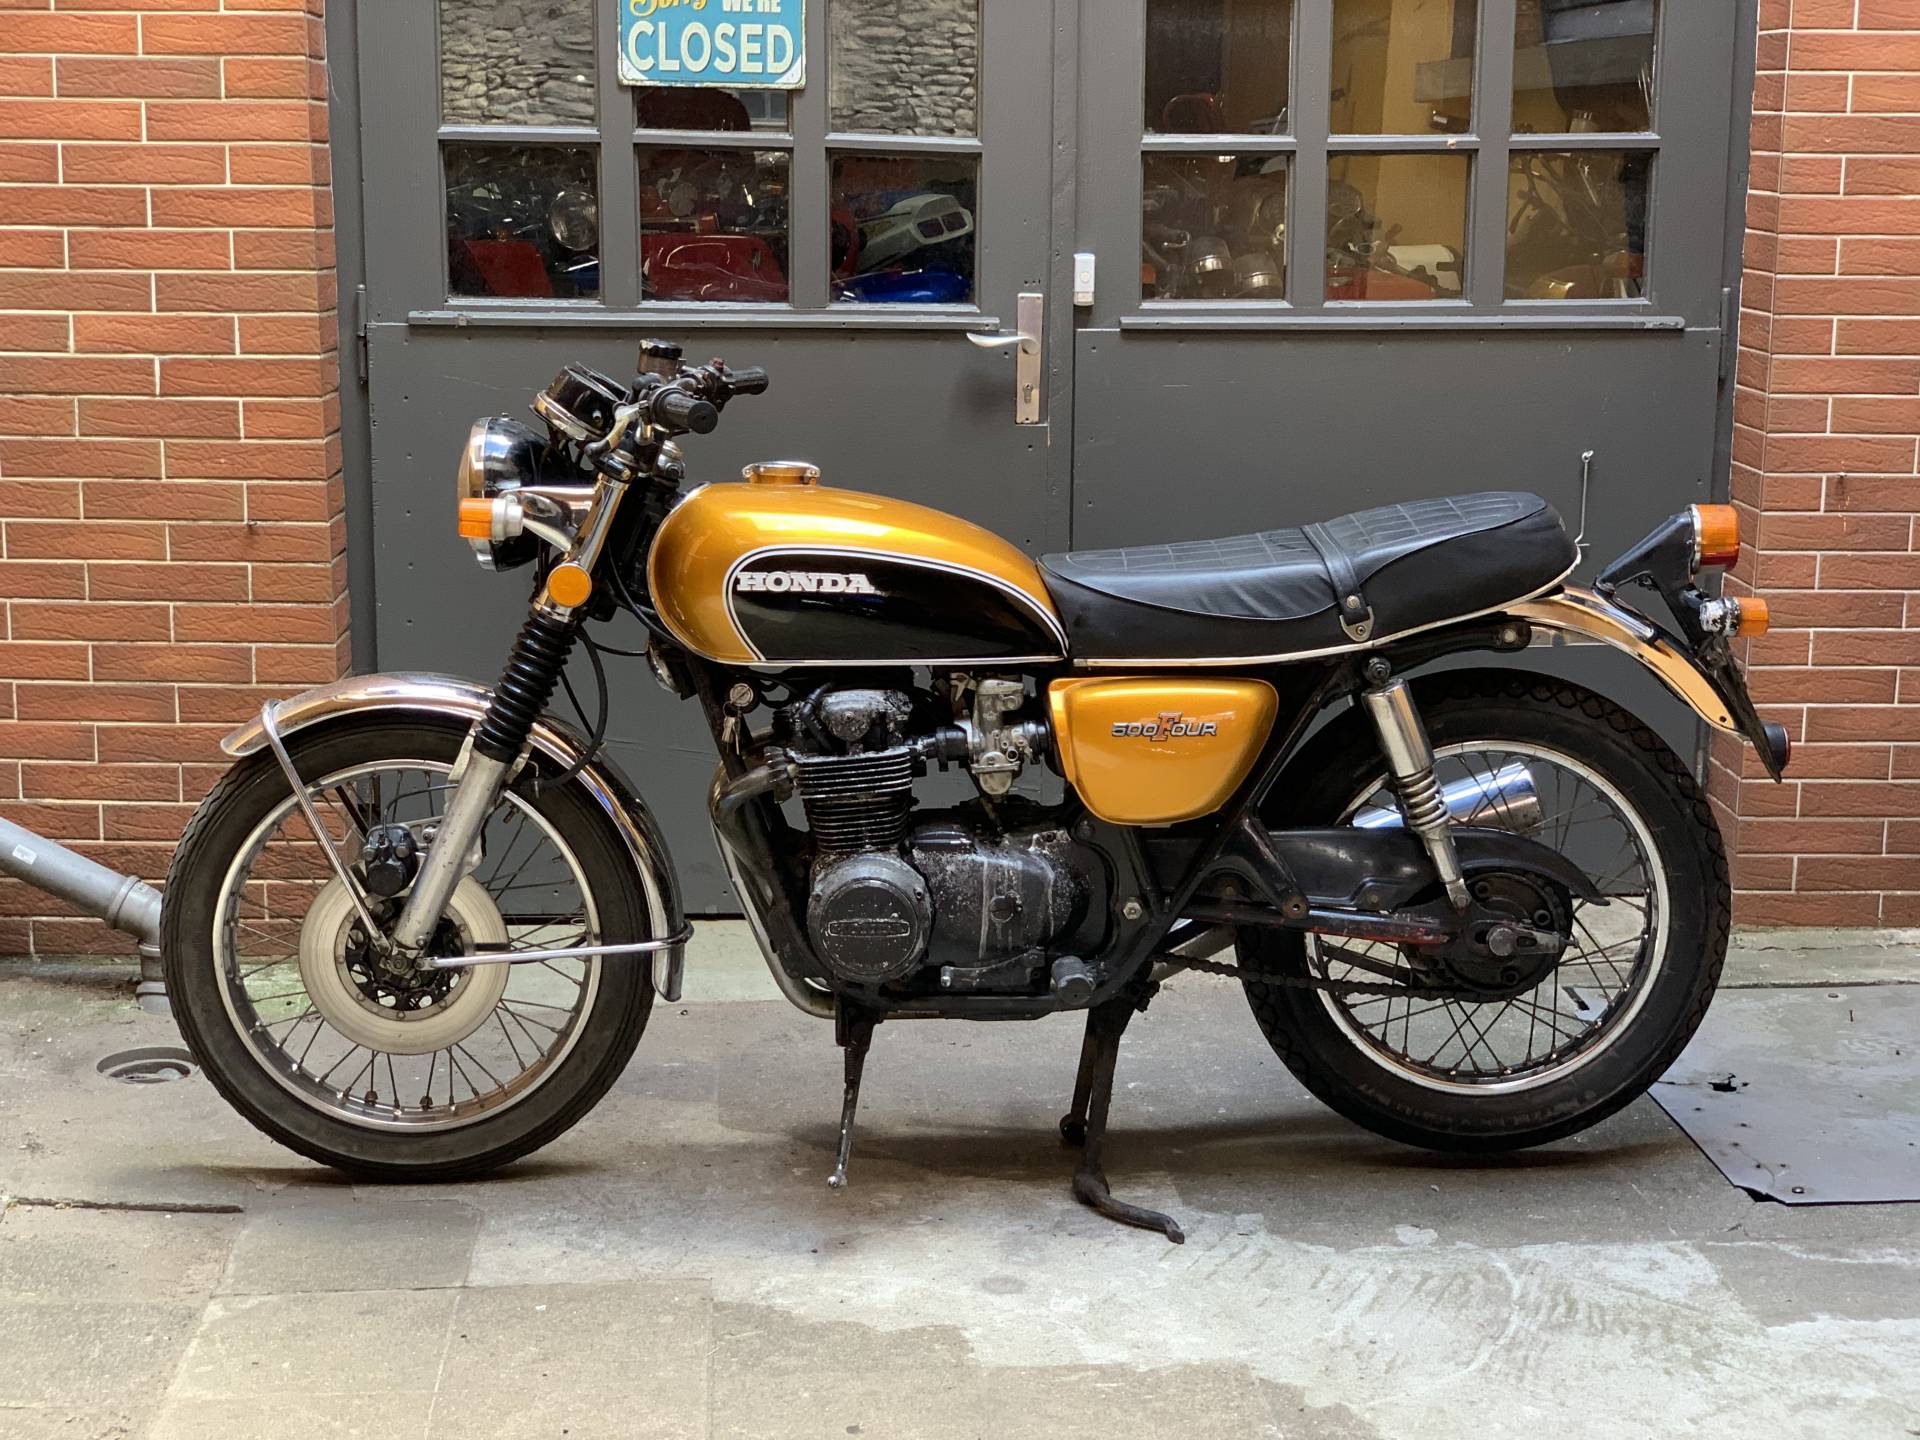 For Sale: Honda CB 500 Four (1974) offered for AUD 6,578